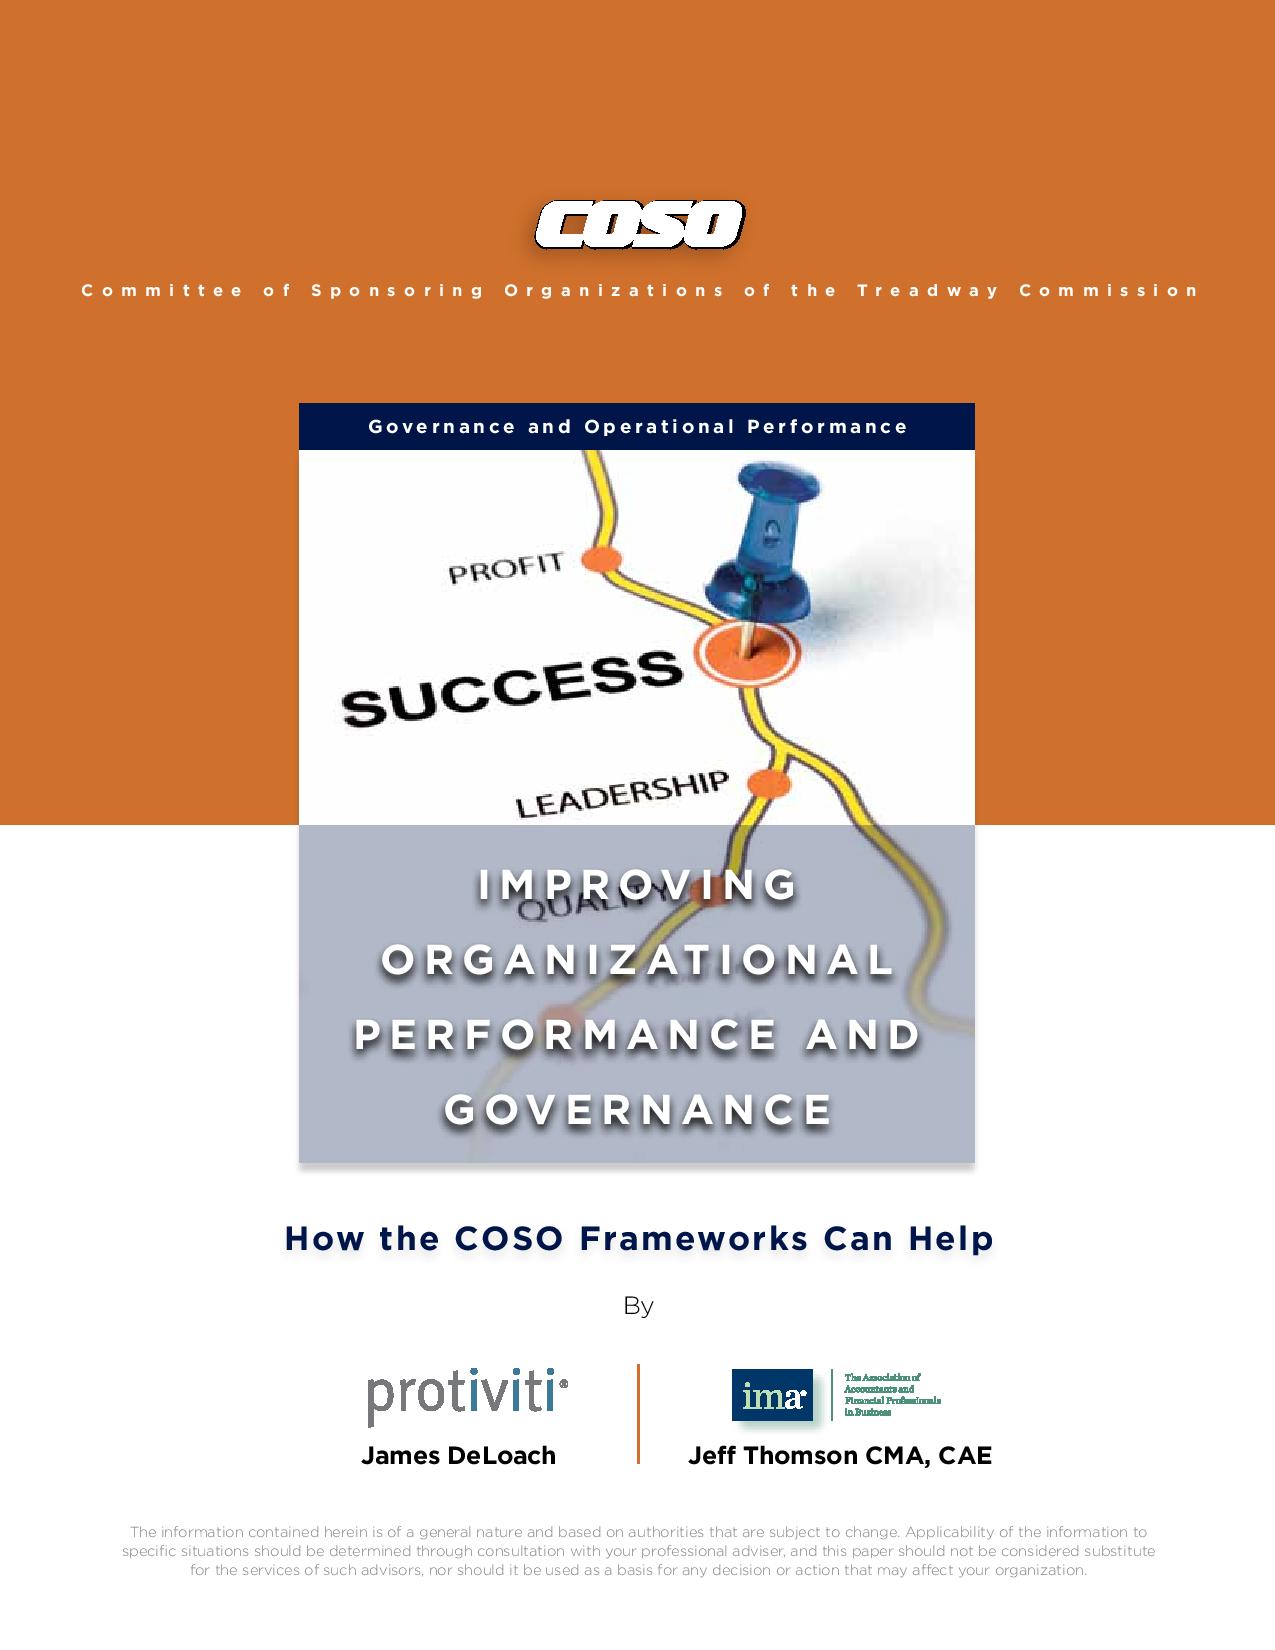 Screenshot of the first page of How COSO Frameworks Improve Organizational Performance and Governance